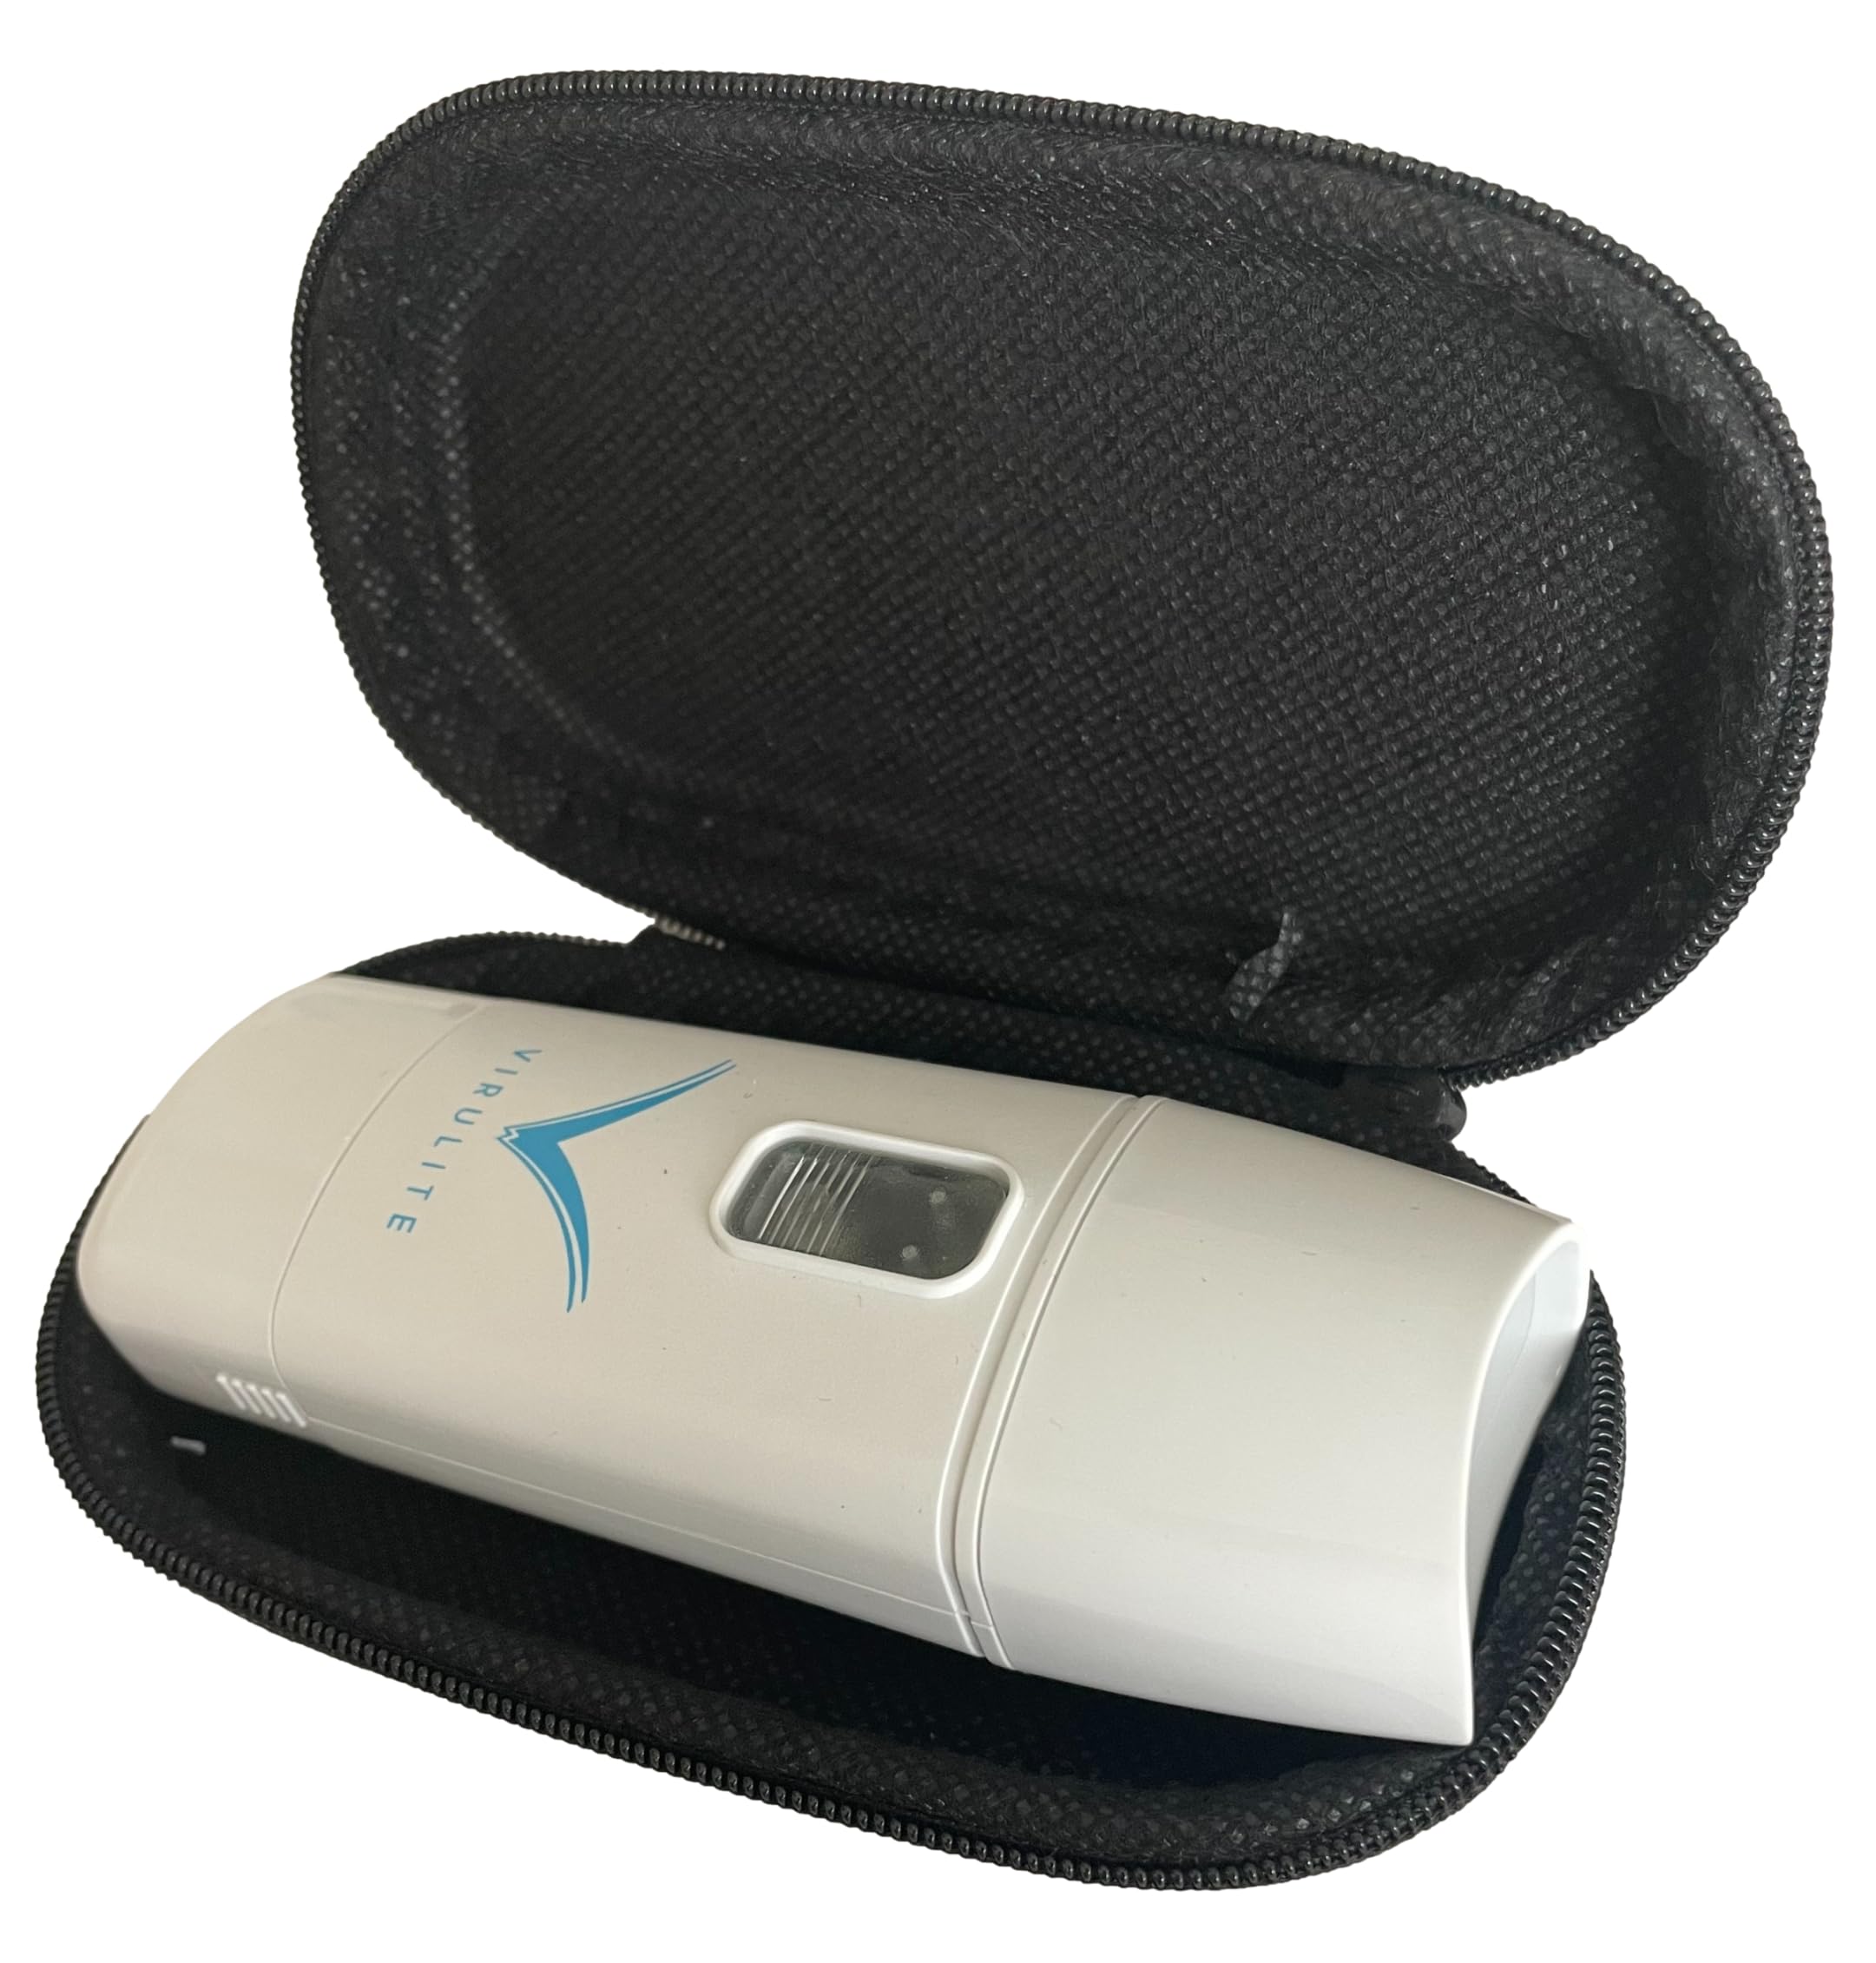 Virulite CS Bundle 2.0 with Protective Case The Only FDA Cleared Device for Cold Sore Treatment